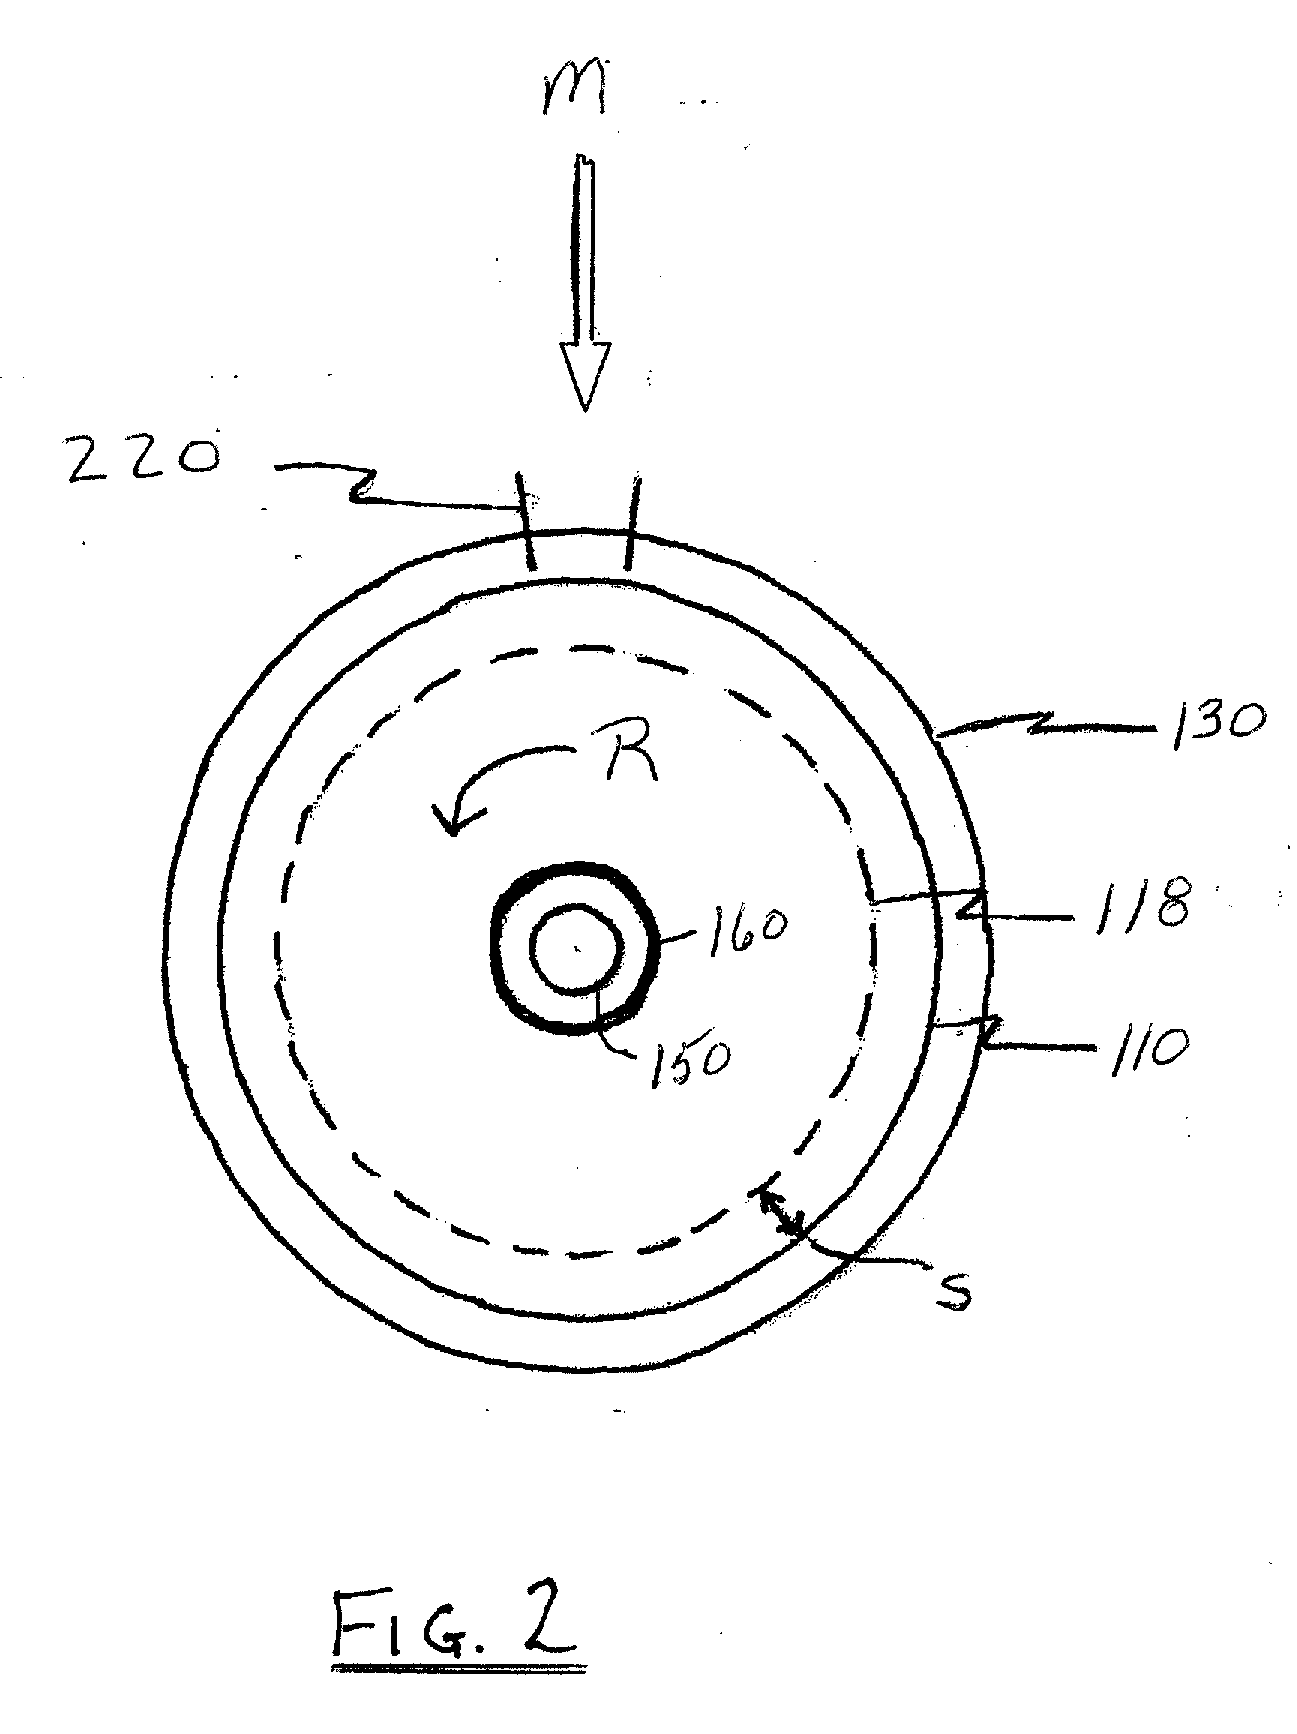 System and Method for Continuous Rapid Cooling of Molten Materials to Produce Uniformly-Shaped Solid Forms